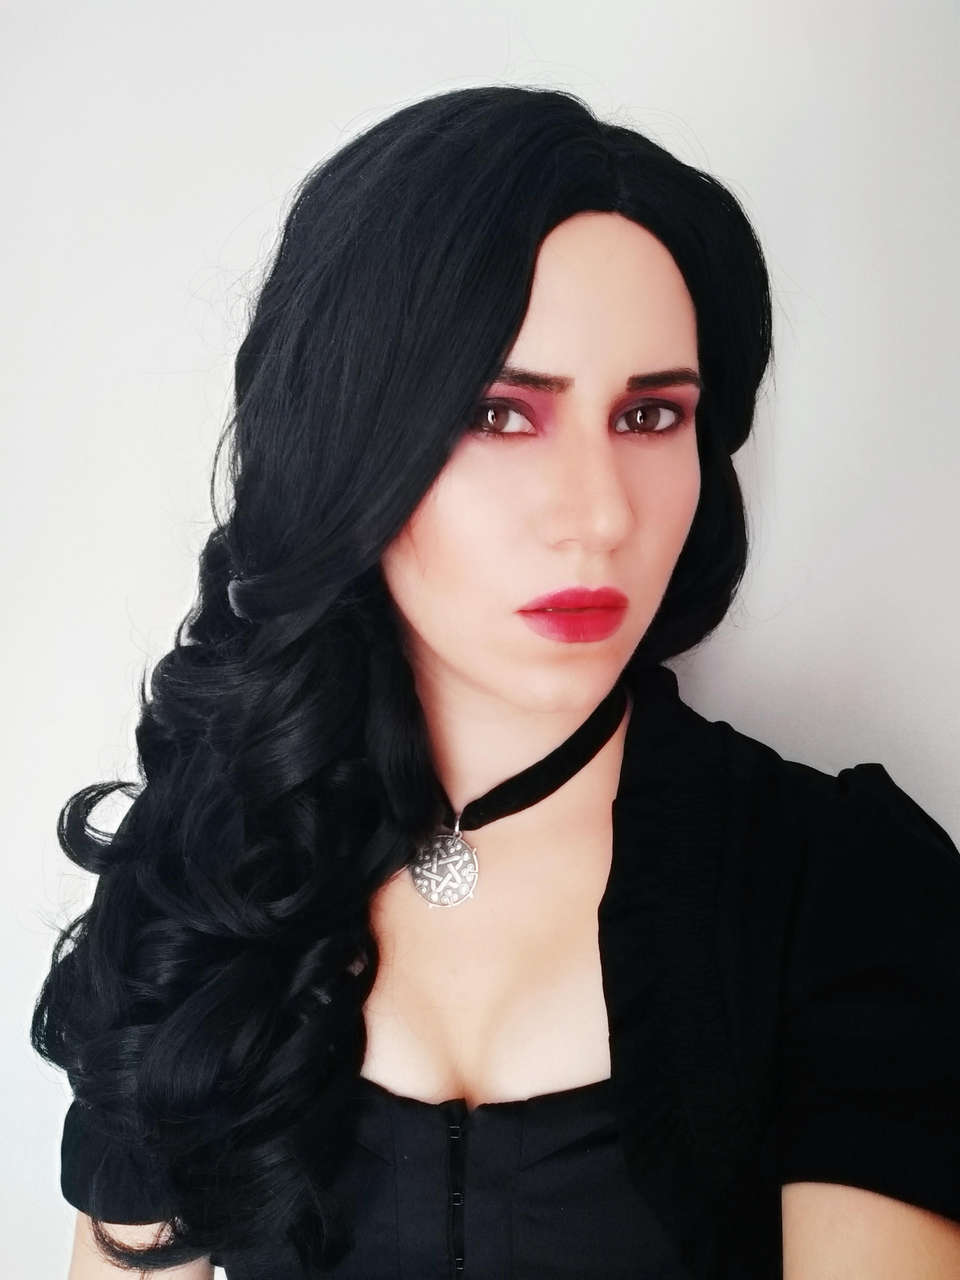 Yennefer From The Witcher Julianakot